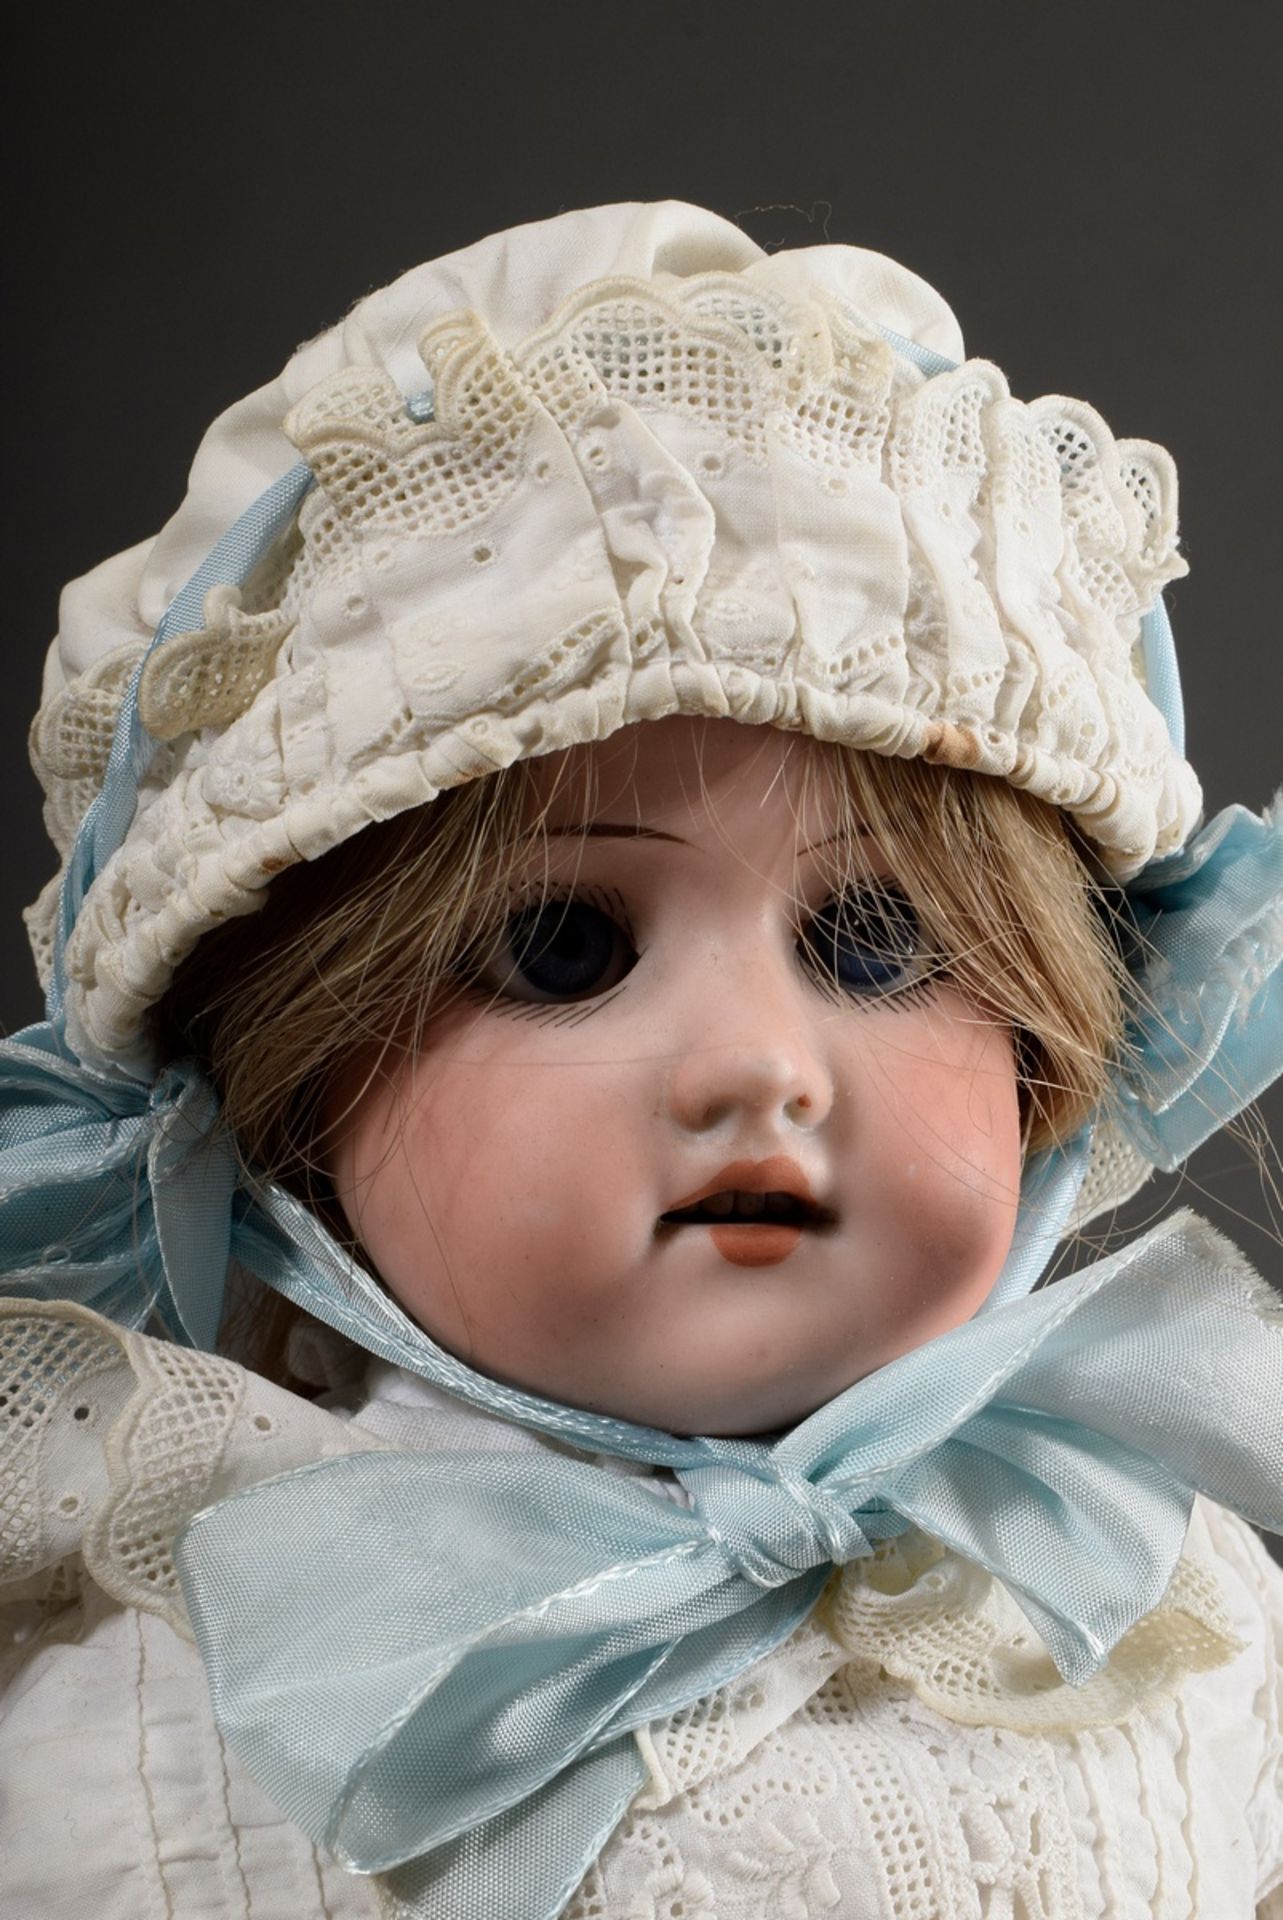 Small doll with porcelain chest head and bisque/leather body, blond real hair wig, blue glass eyes, - Image 2 of 8